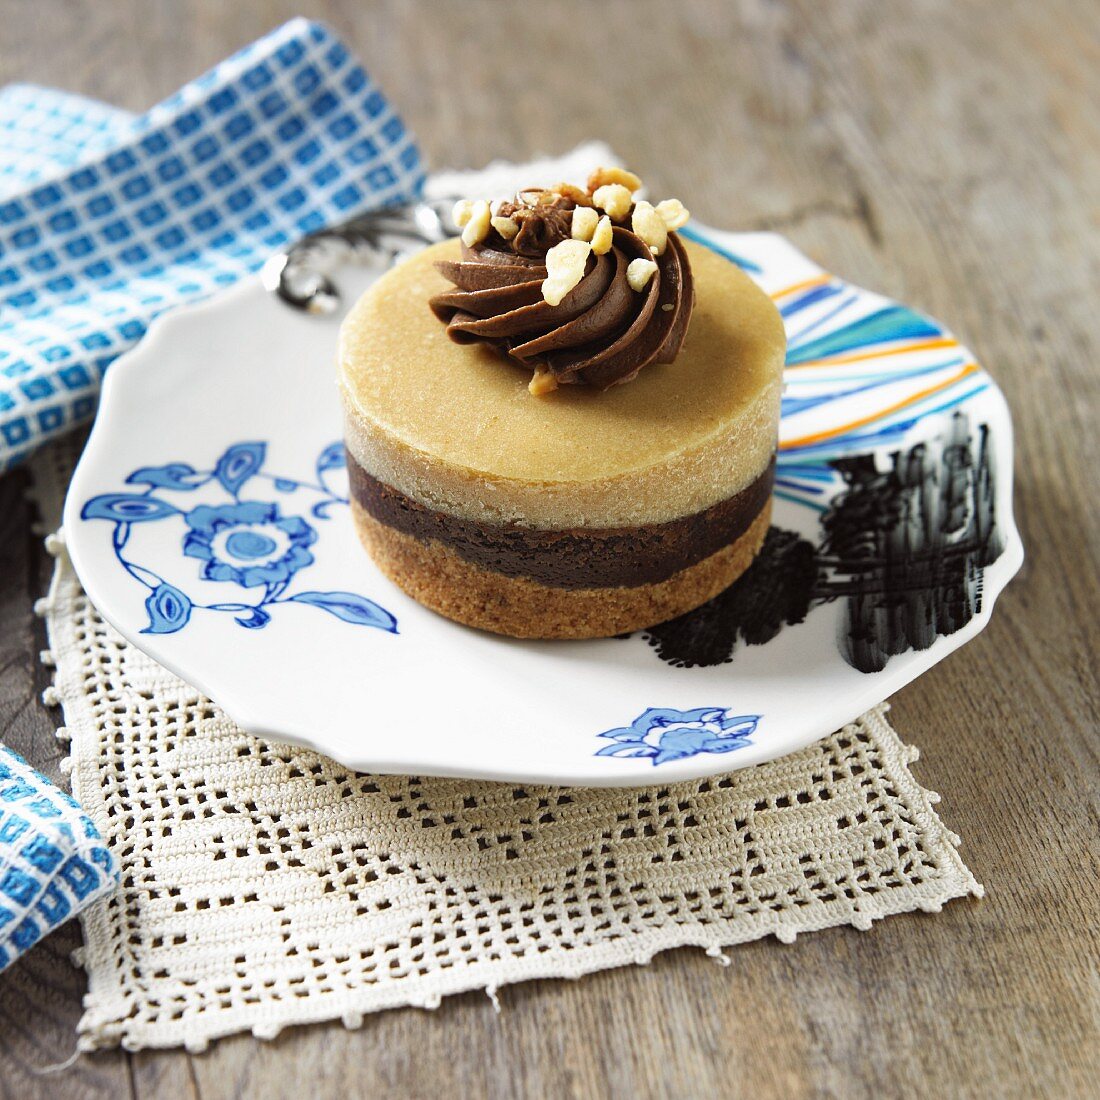 Individual Peanut Butter Chocolate Cheesecake on a Plate